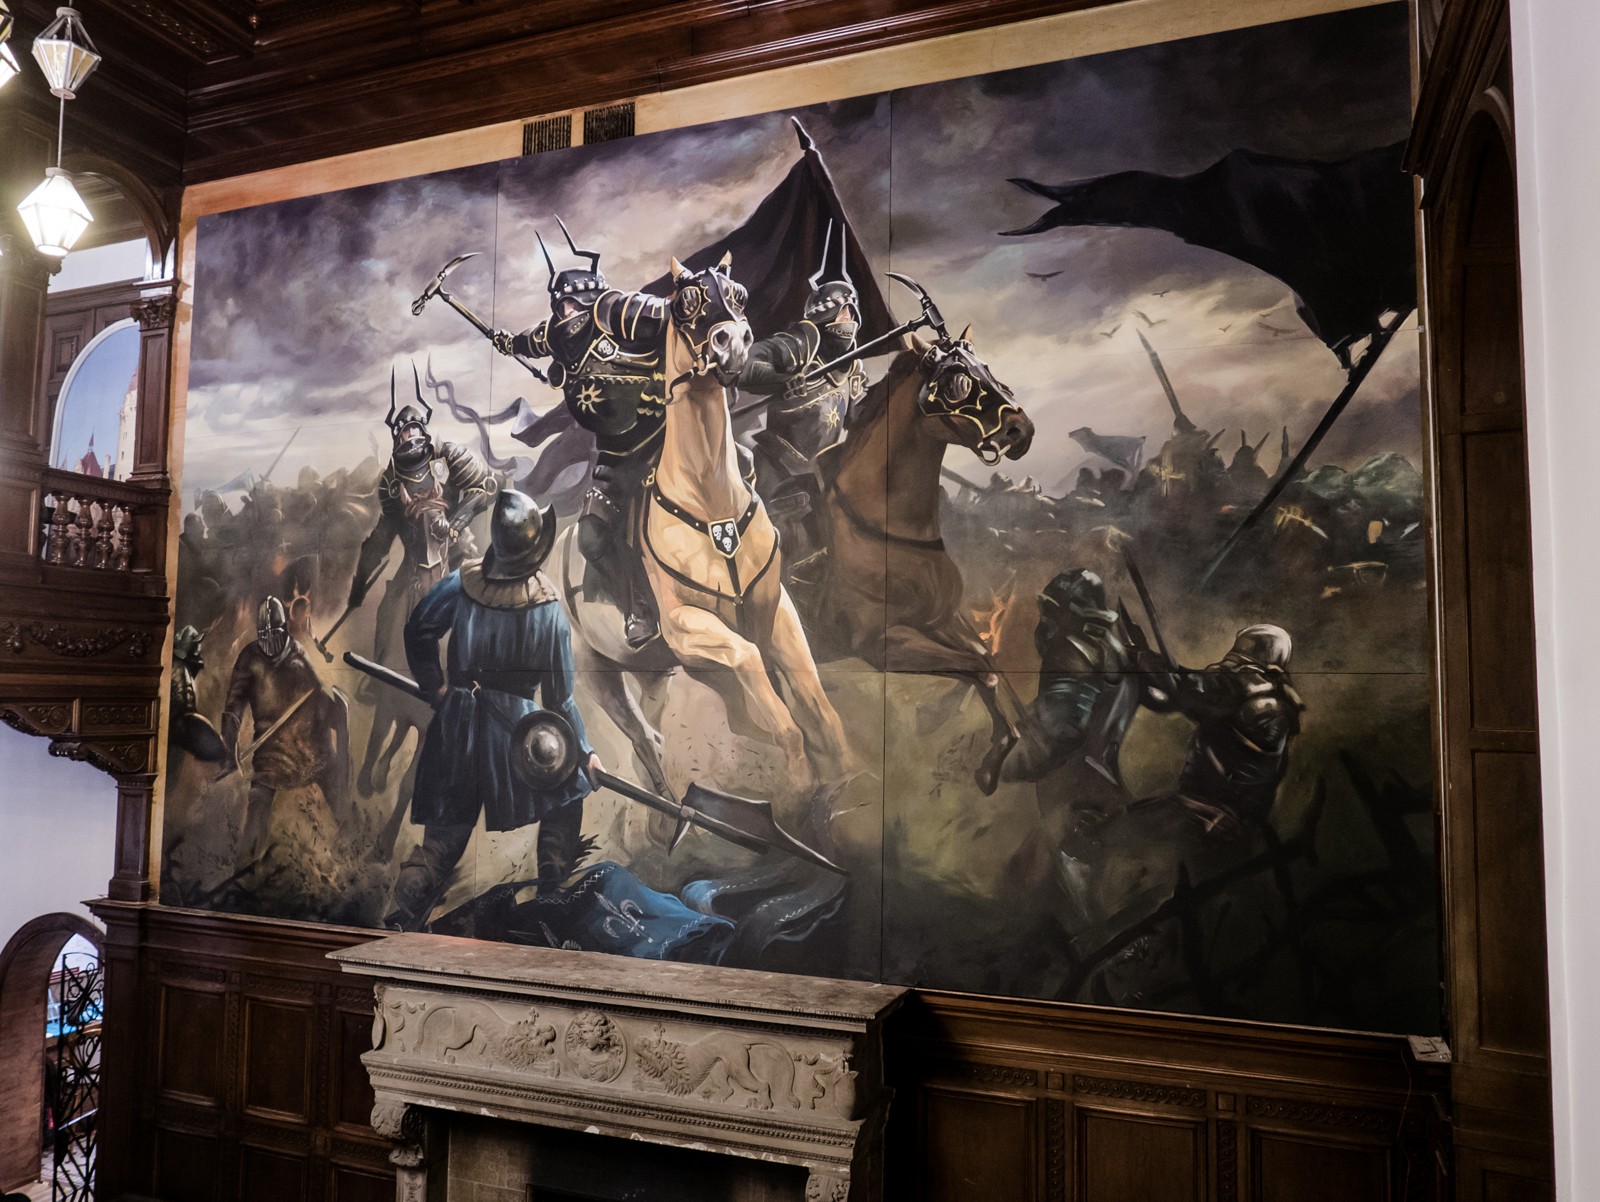 Picture above the fireplace at the Castle in Moszna depicting the scene from The Witcher | Wiedźmin - Pałac w Mosznej | Portfolio